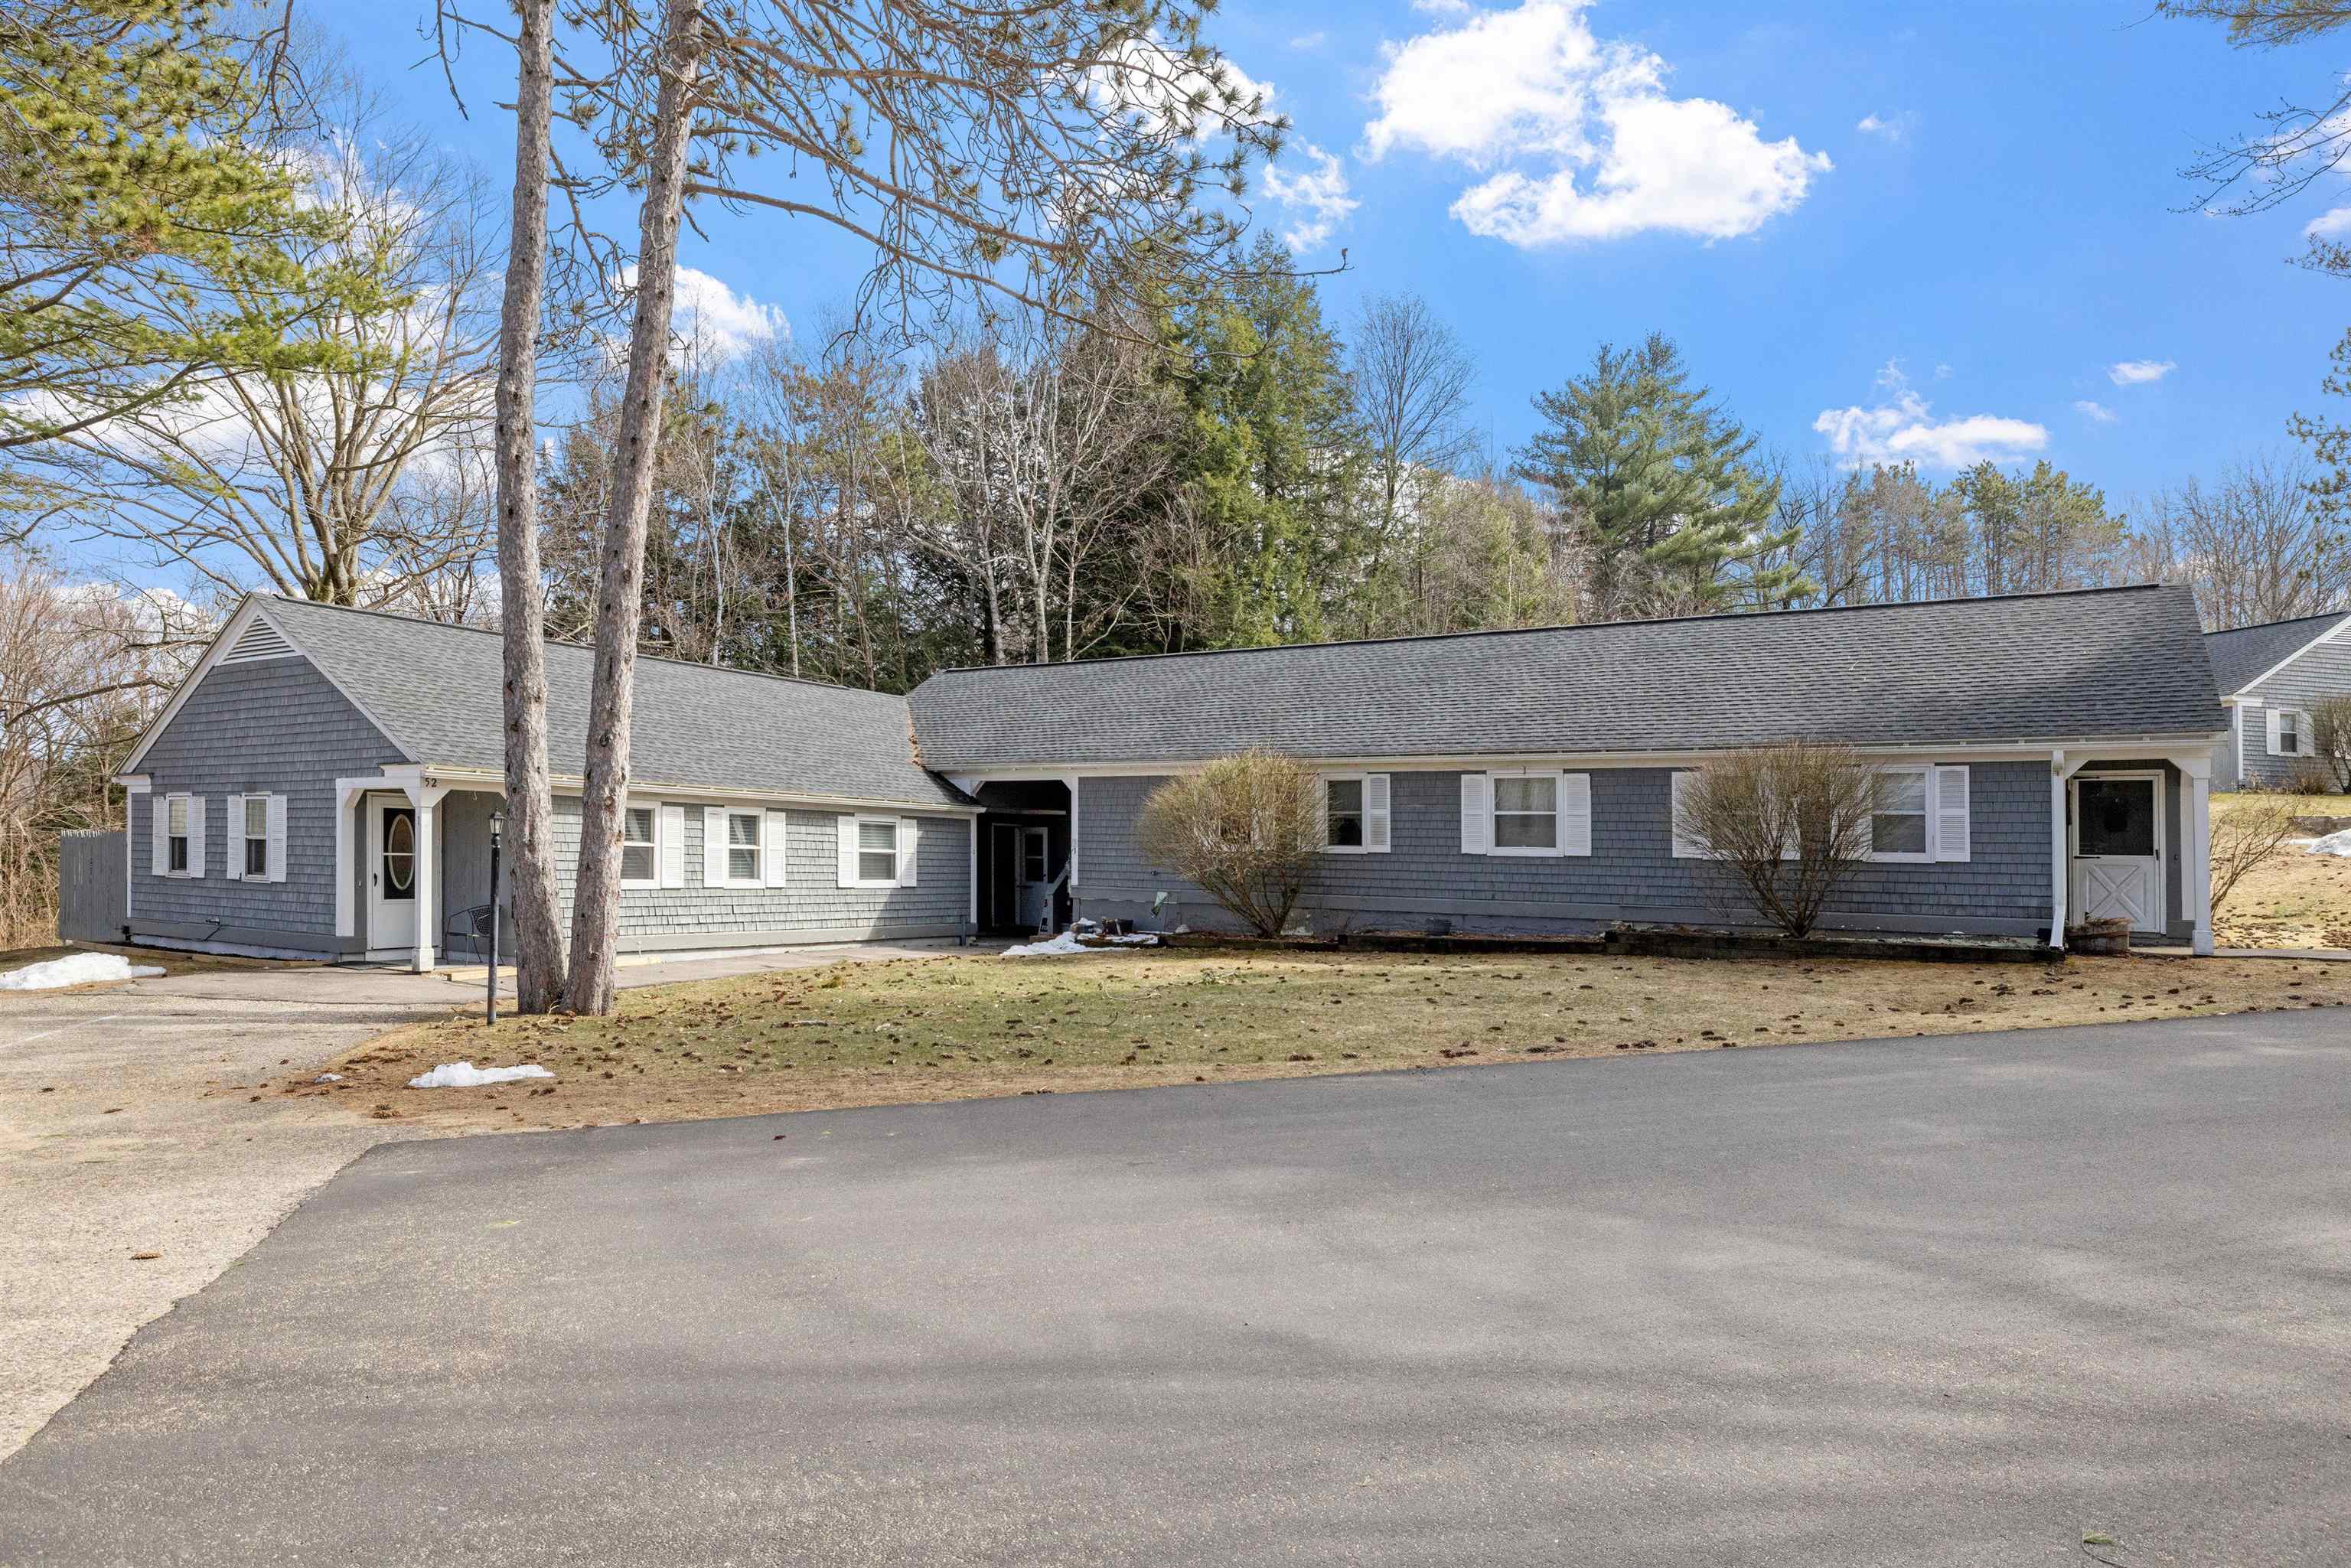 52 Orchard Hill Road 1, Belmont, NH 